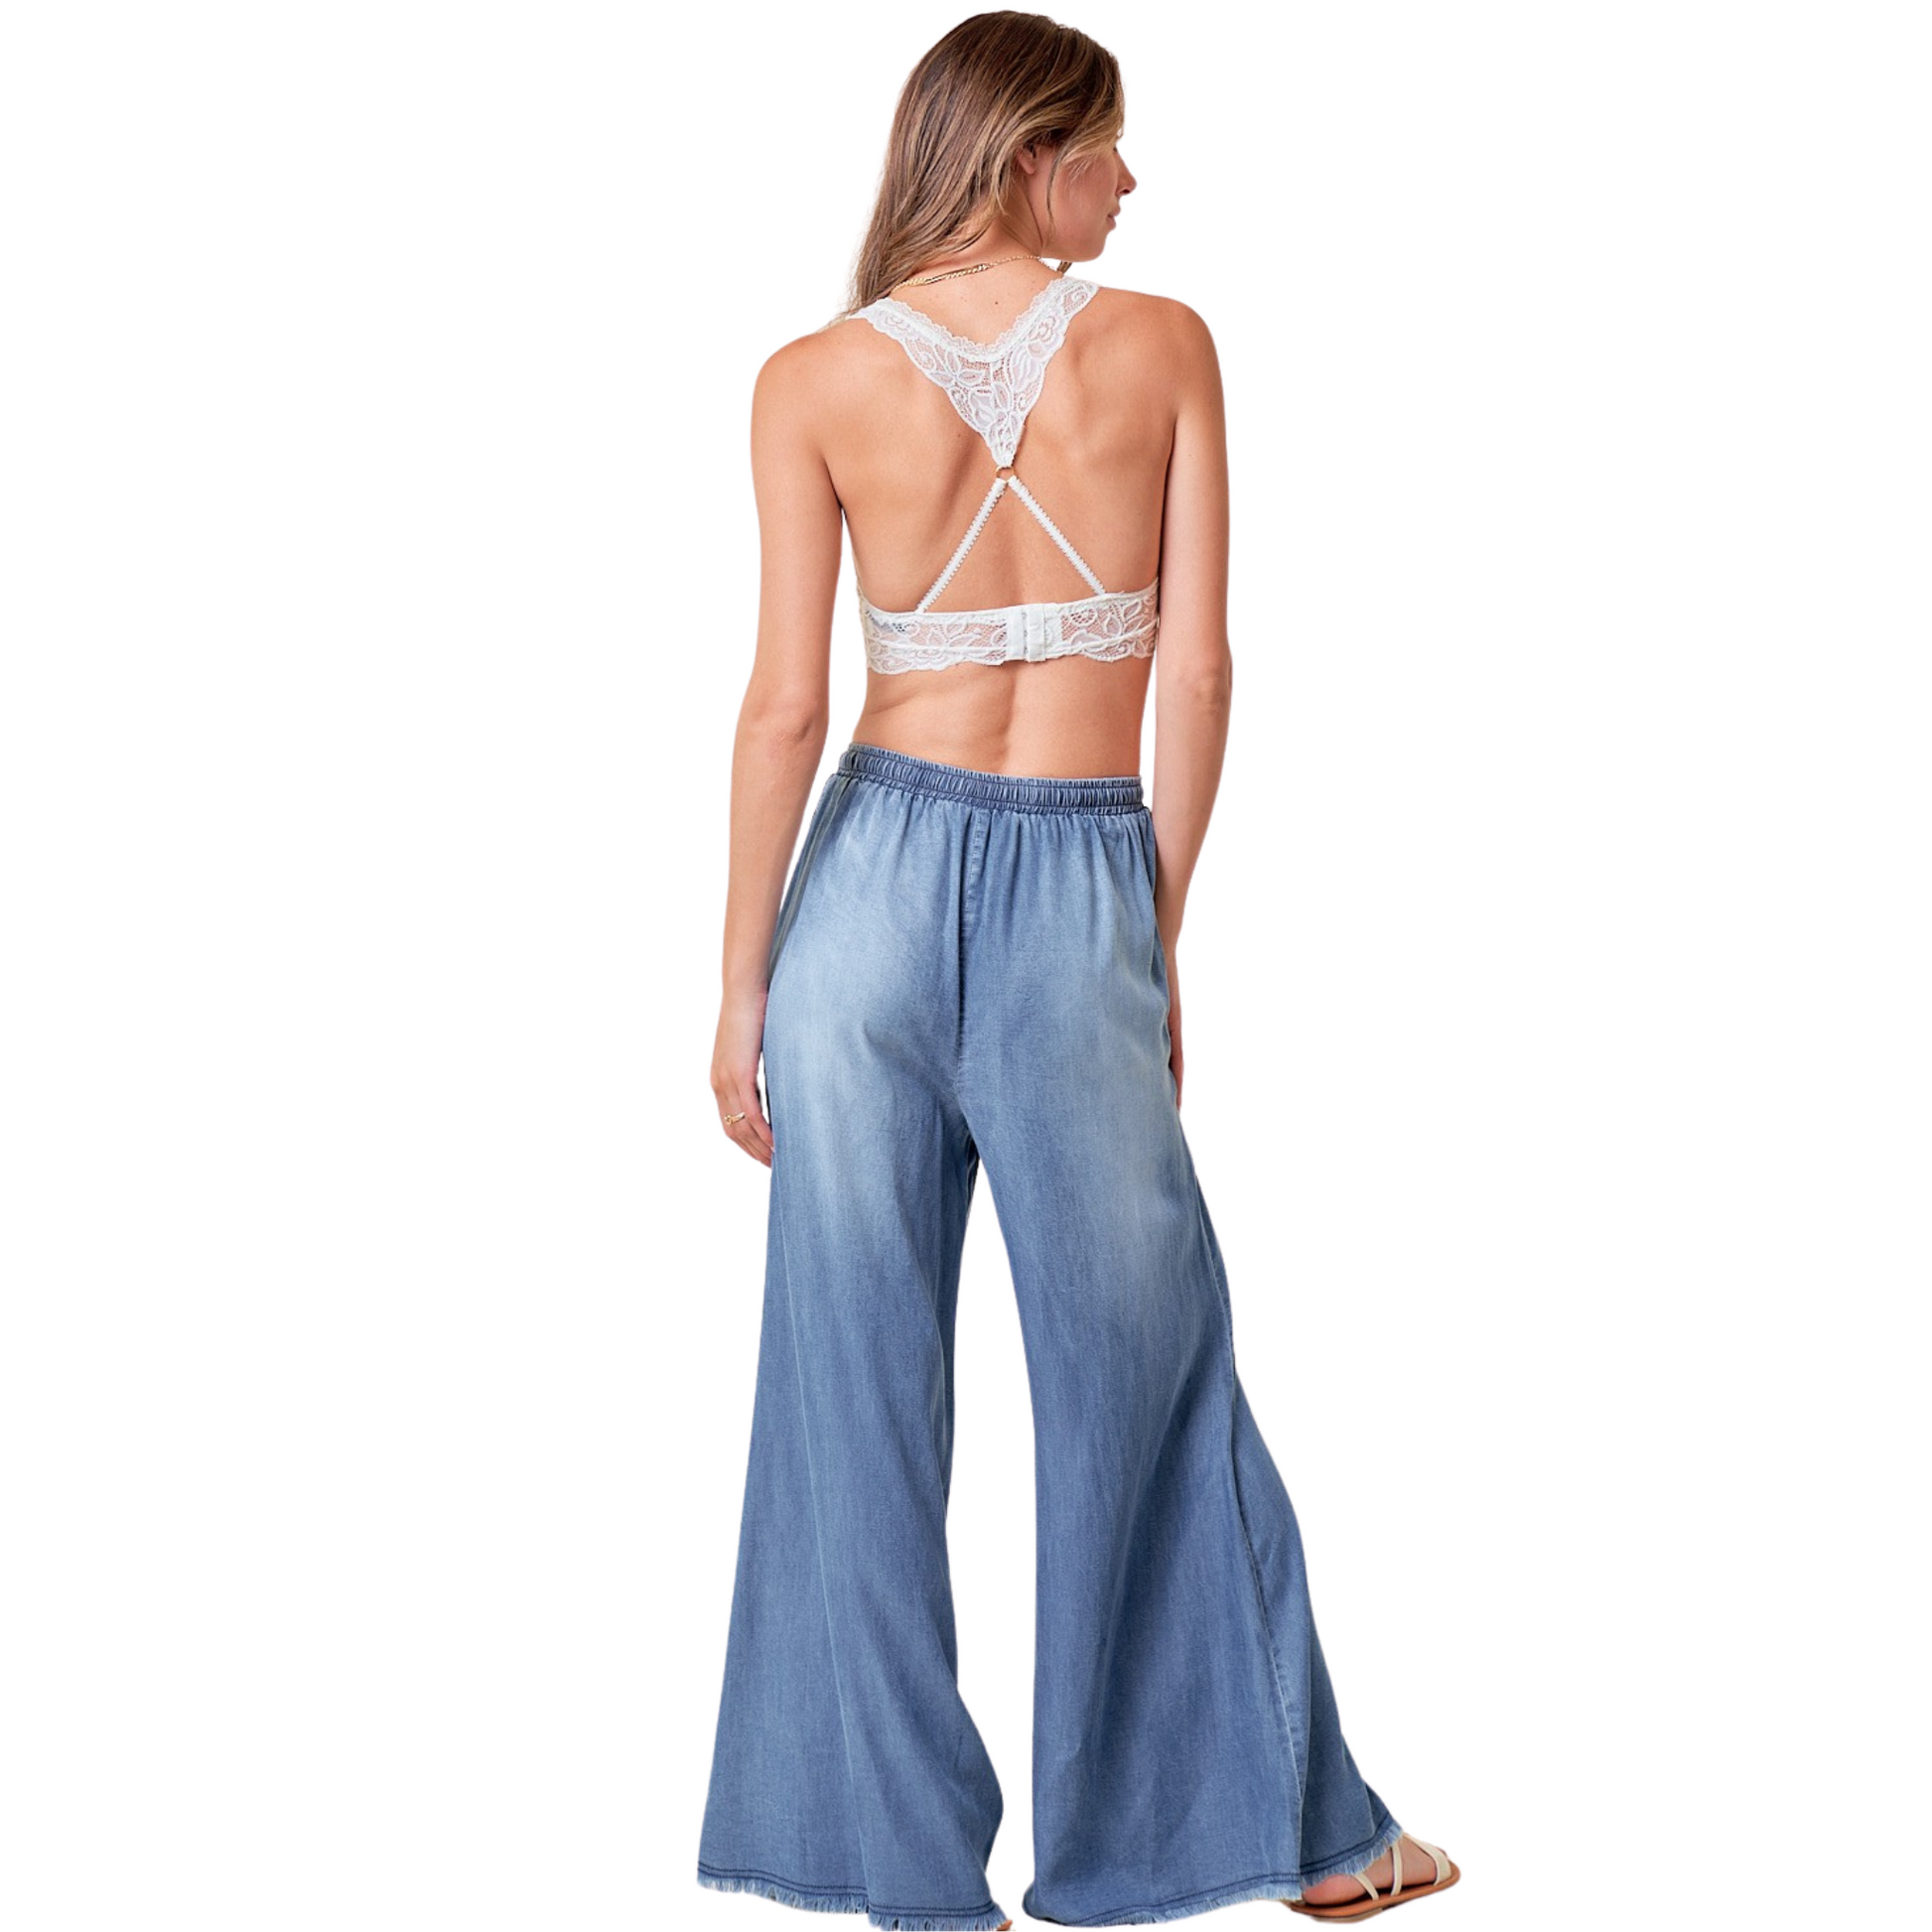 These wide leg denim pants are perfect for any casual outing. The light wash adds a touch of style while the drawstring allows for a customizable fit. Made from high-quality denim, these pants provide both comfort and fashion for any occasion.